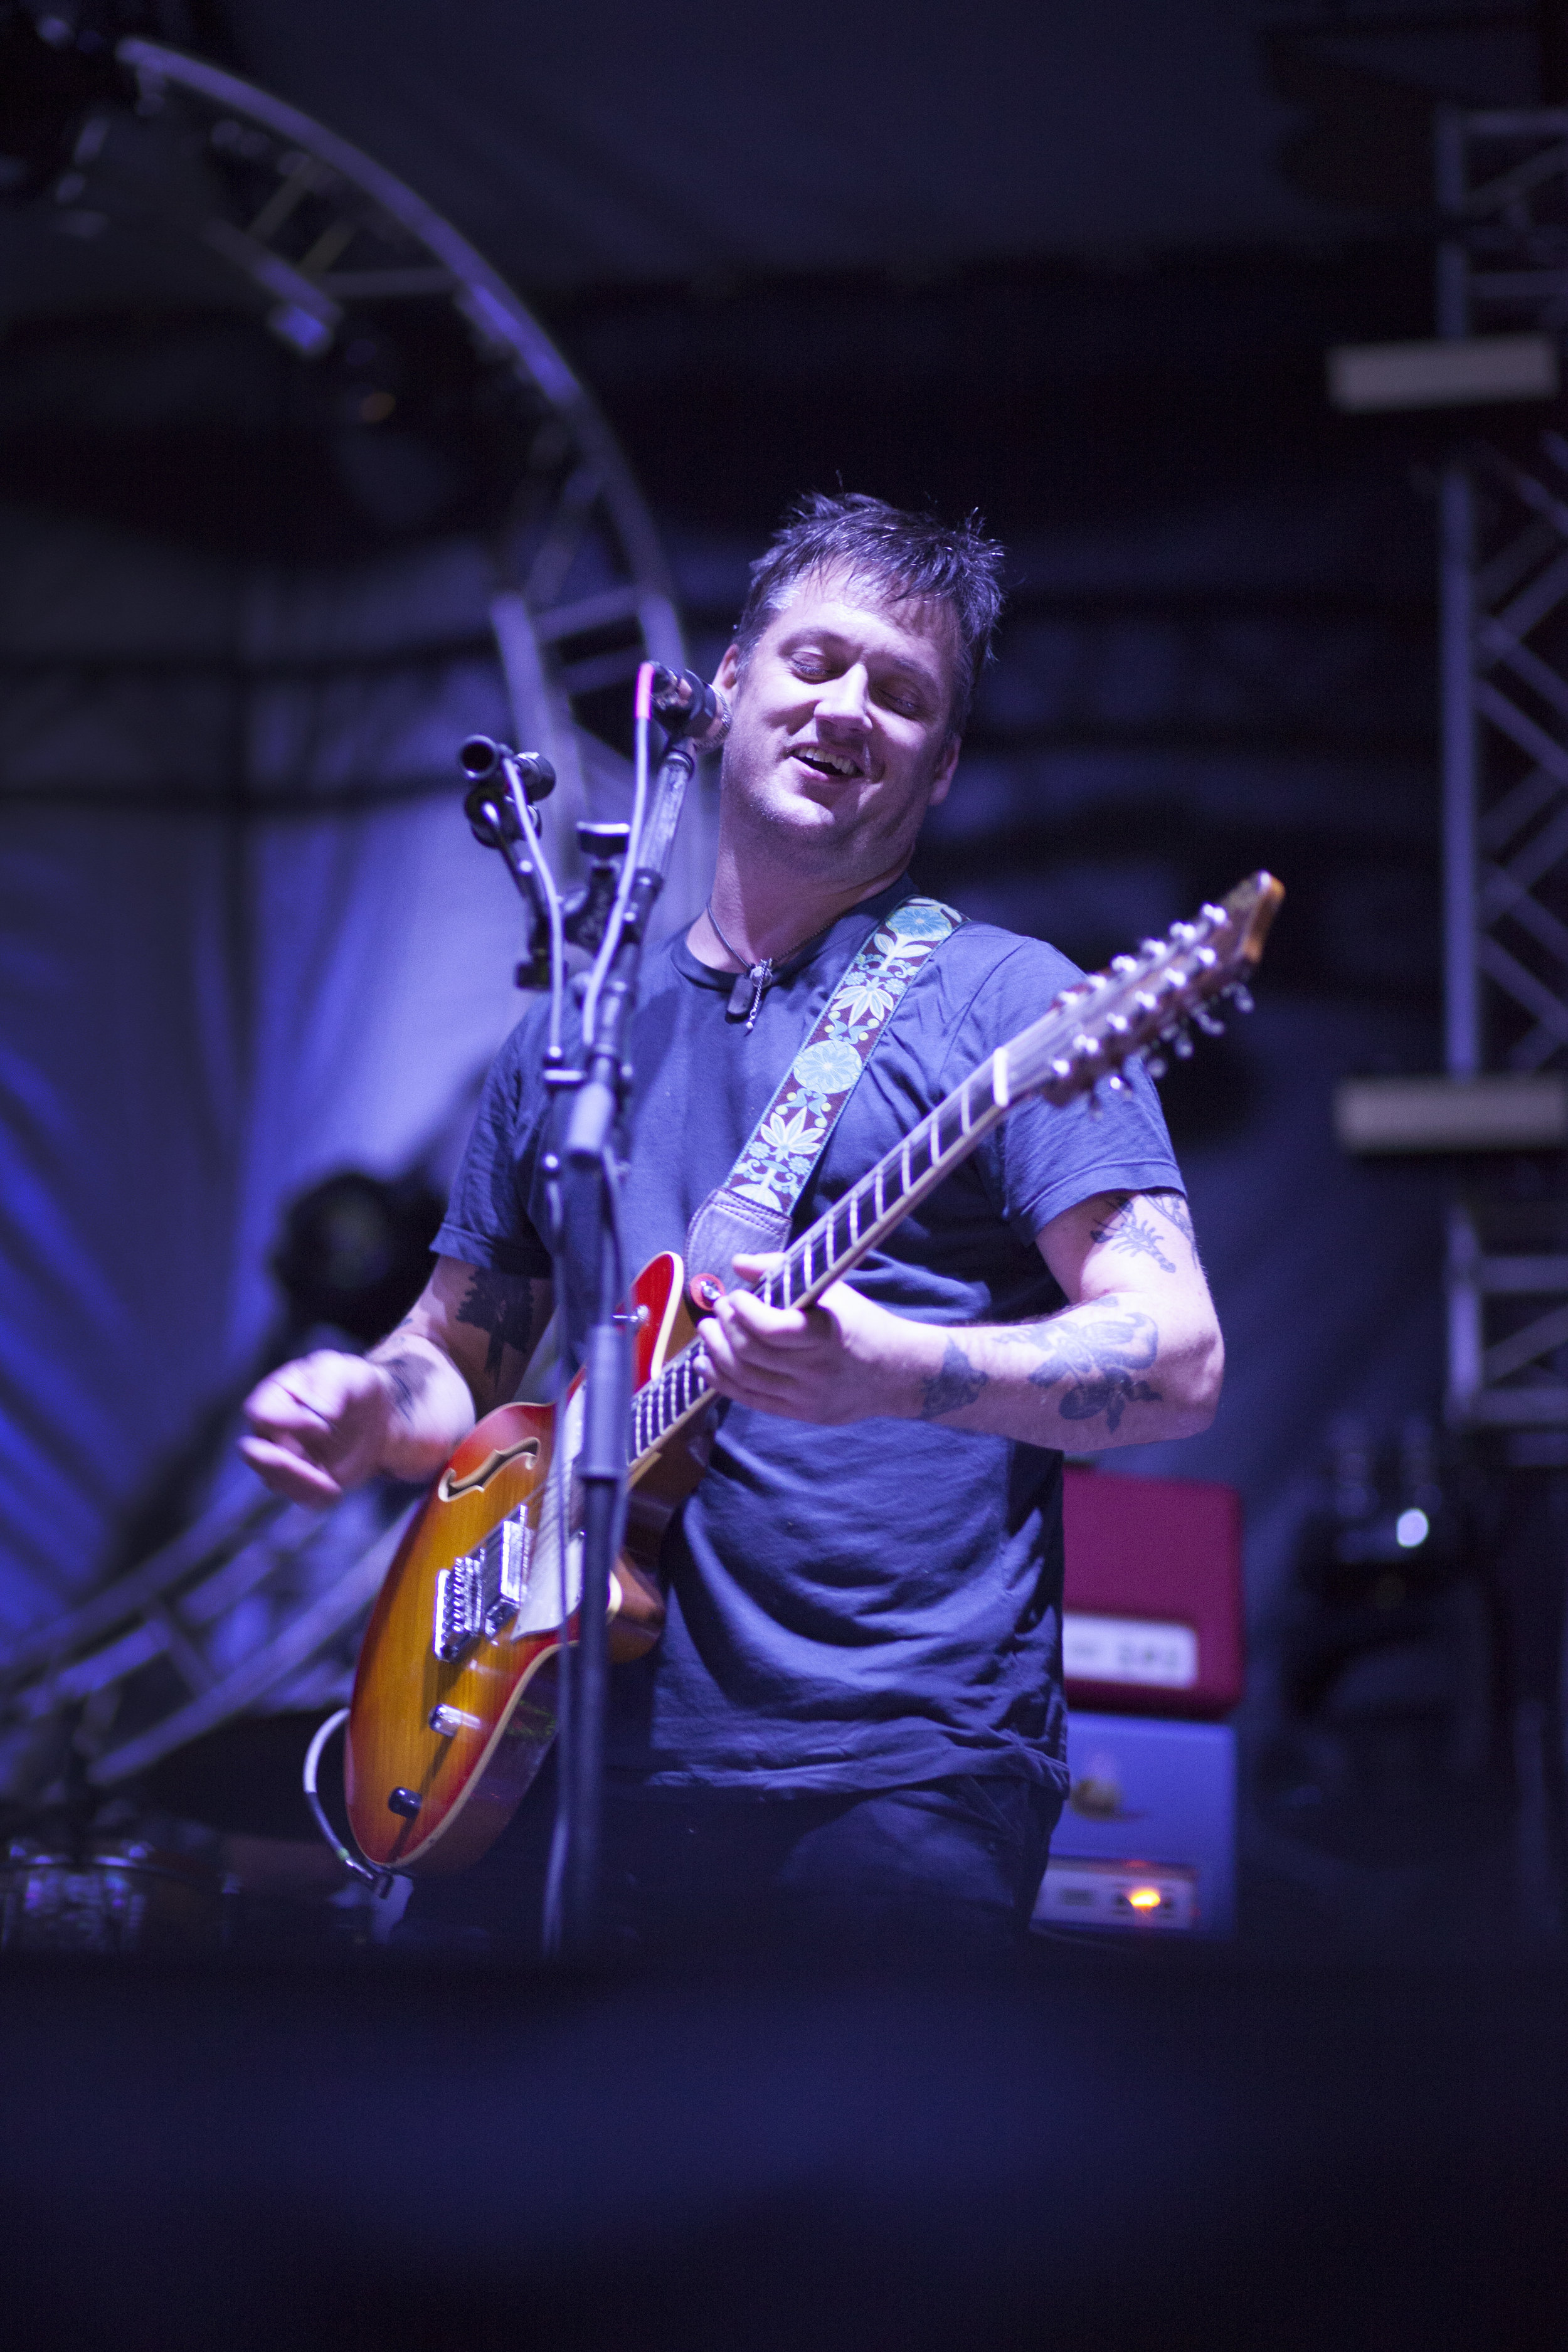  Singer Isaac Brock of Modest Mouse 